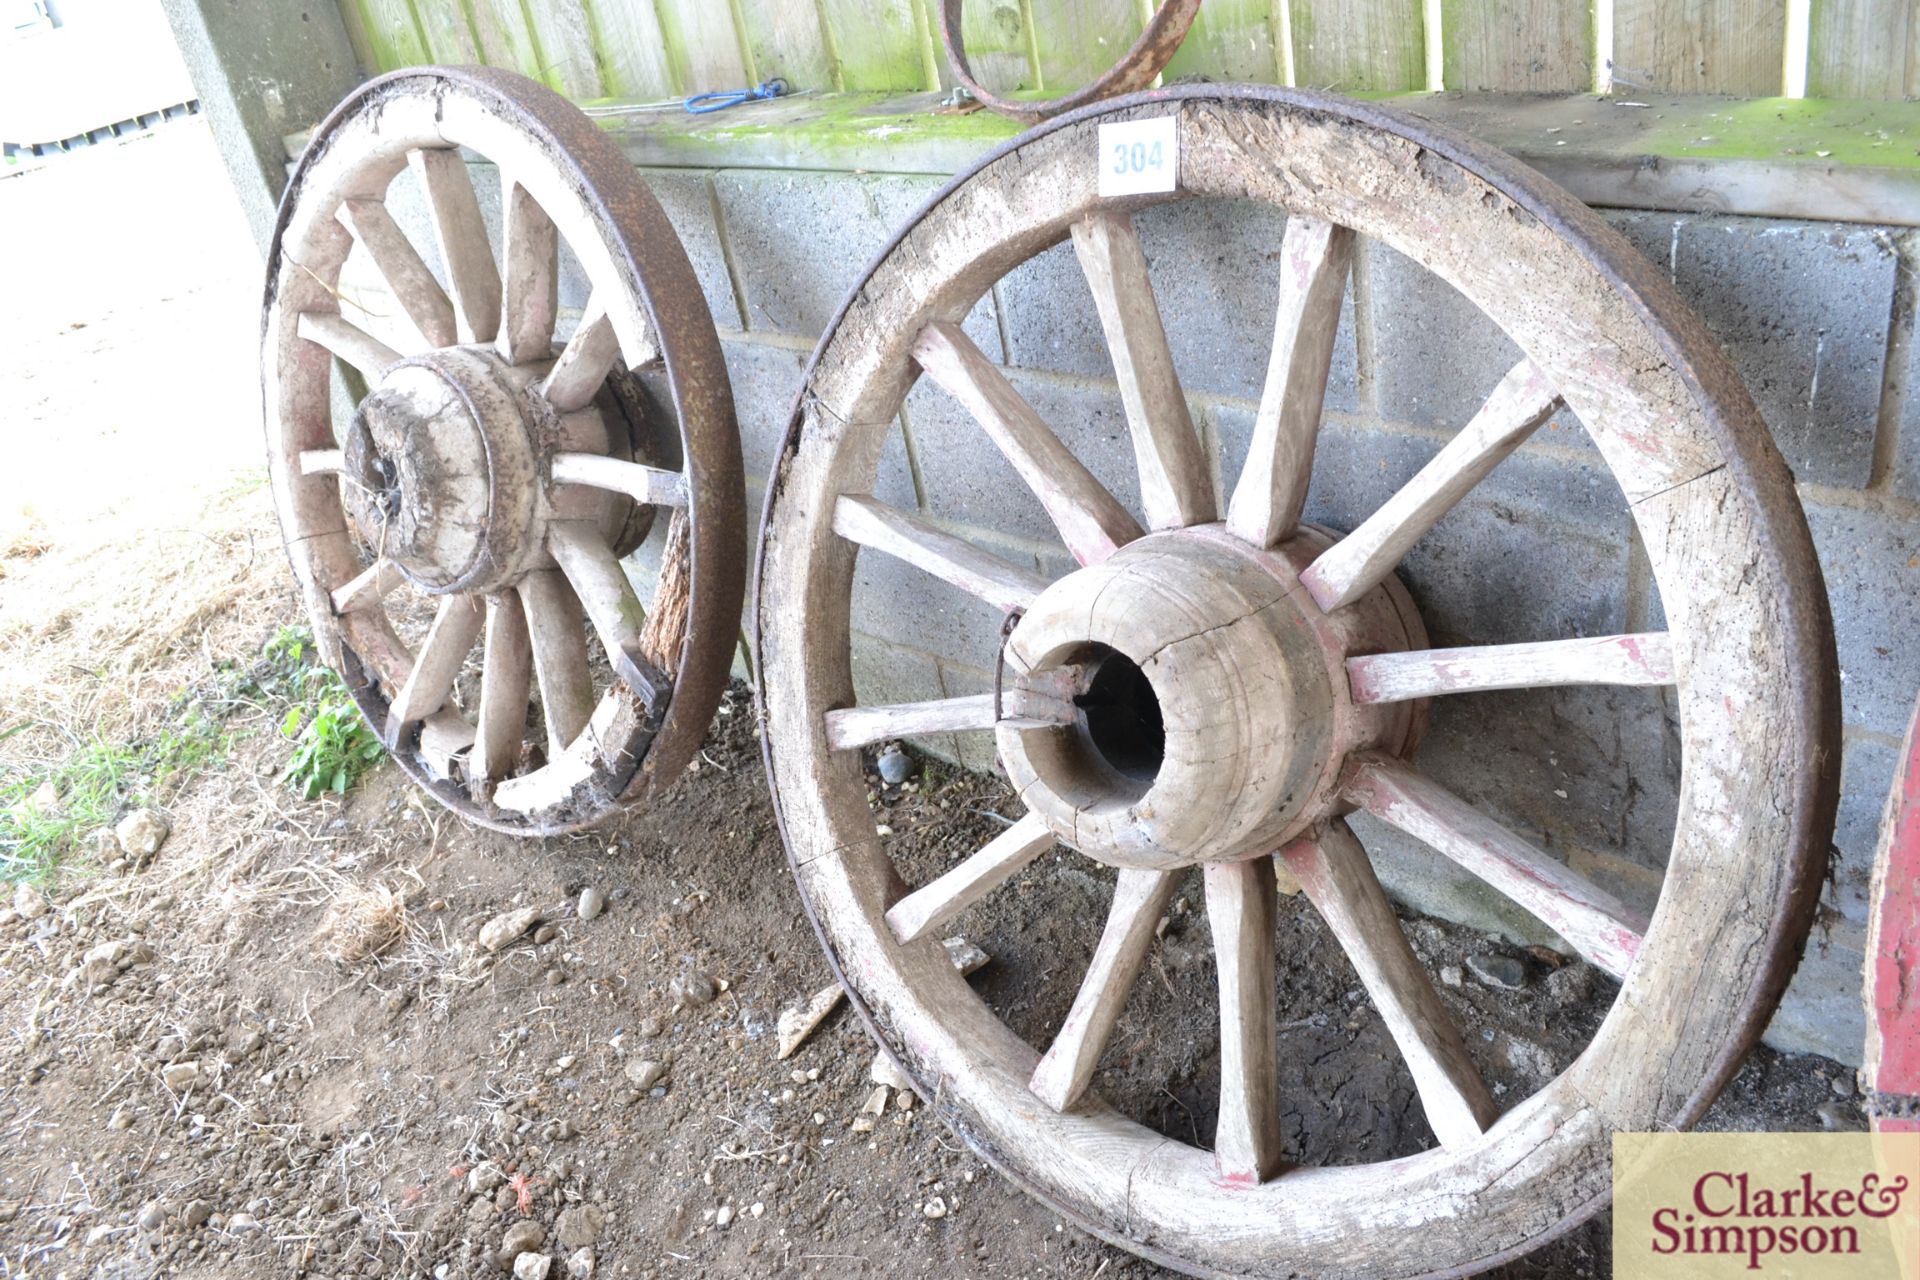 Pair of front wagon wheels.